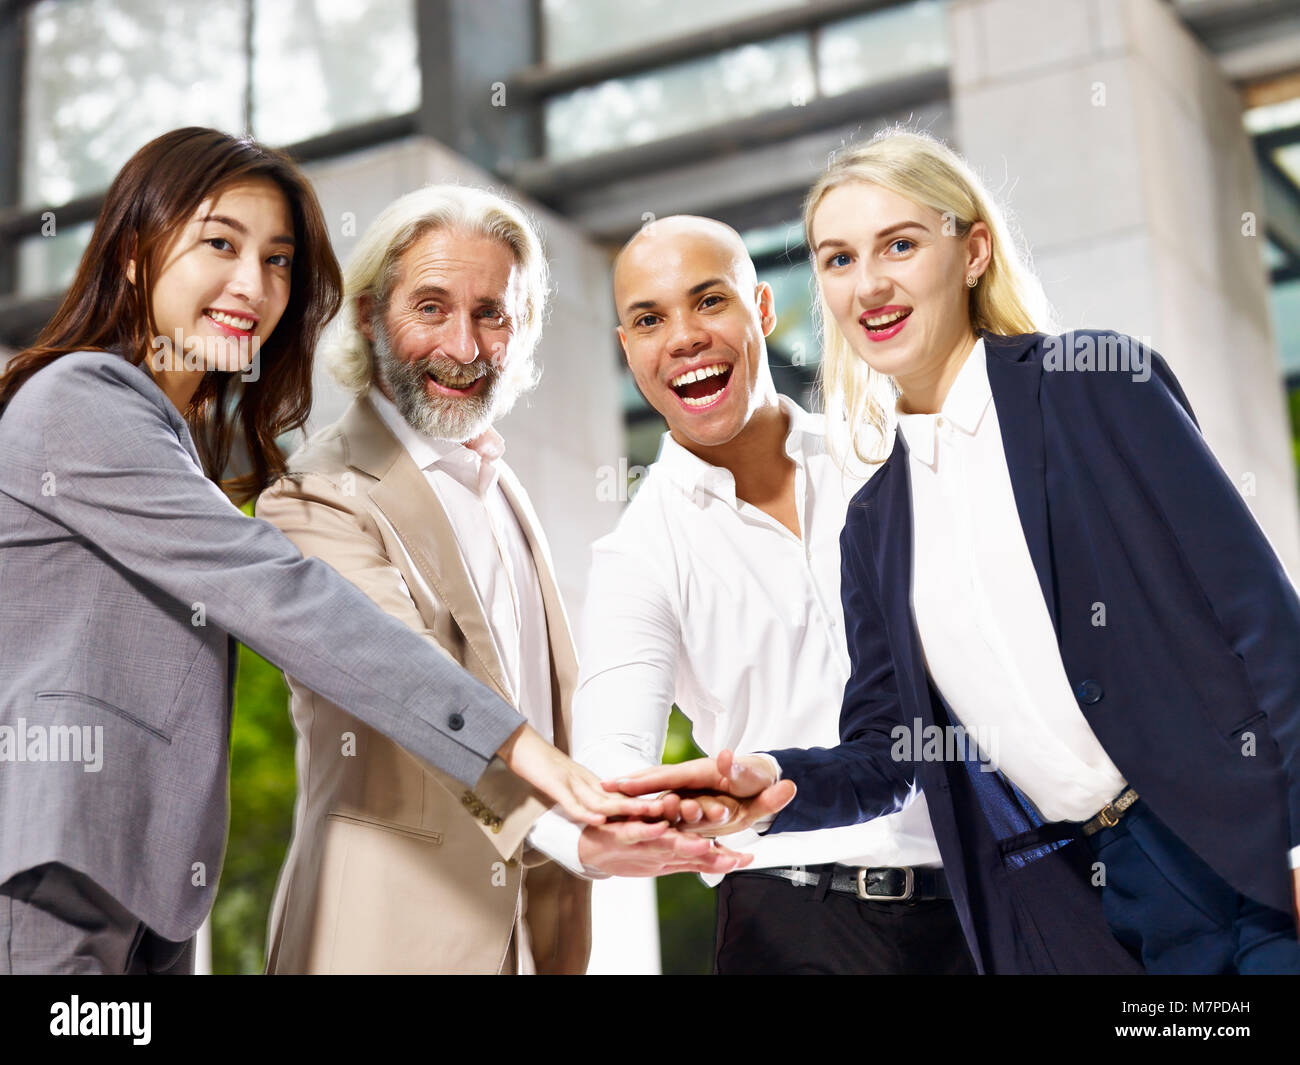 caucasian asian latino corporate business people putting hands together showing unity and team spirit Stock Photo